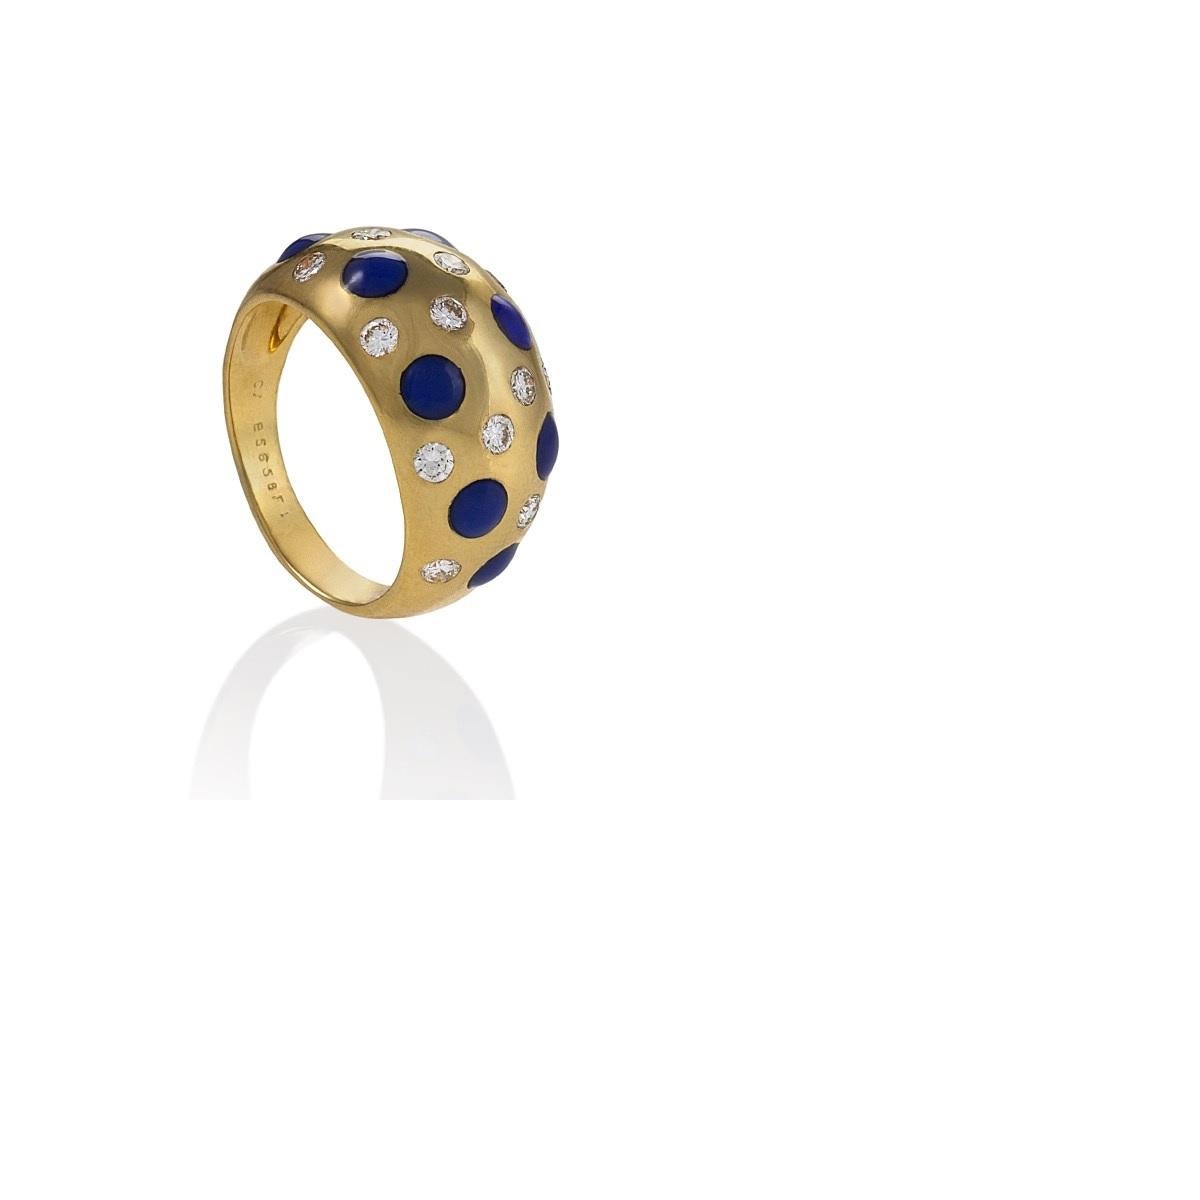 A French 18 karat gold ring with diamonds and sapphires by Van Cleef & Arpels. The is ring has 13 round brilliant cut diamonds with an approximate total weight of .65 carats, and 8 cabochon sapphires with an approximate total weight of .96 carats. 